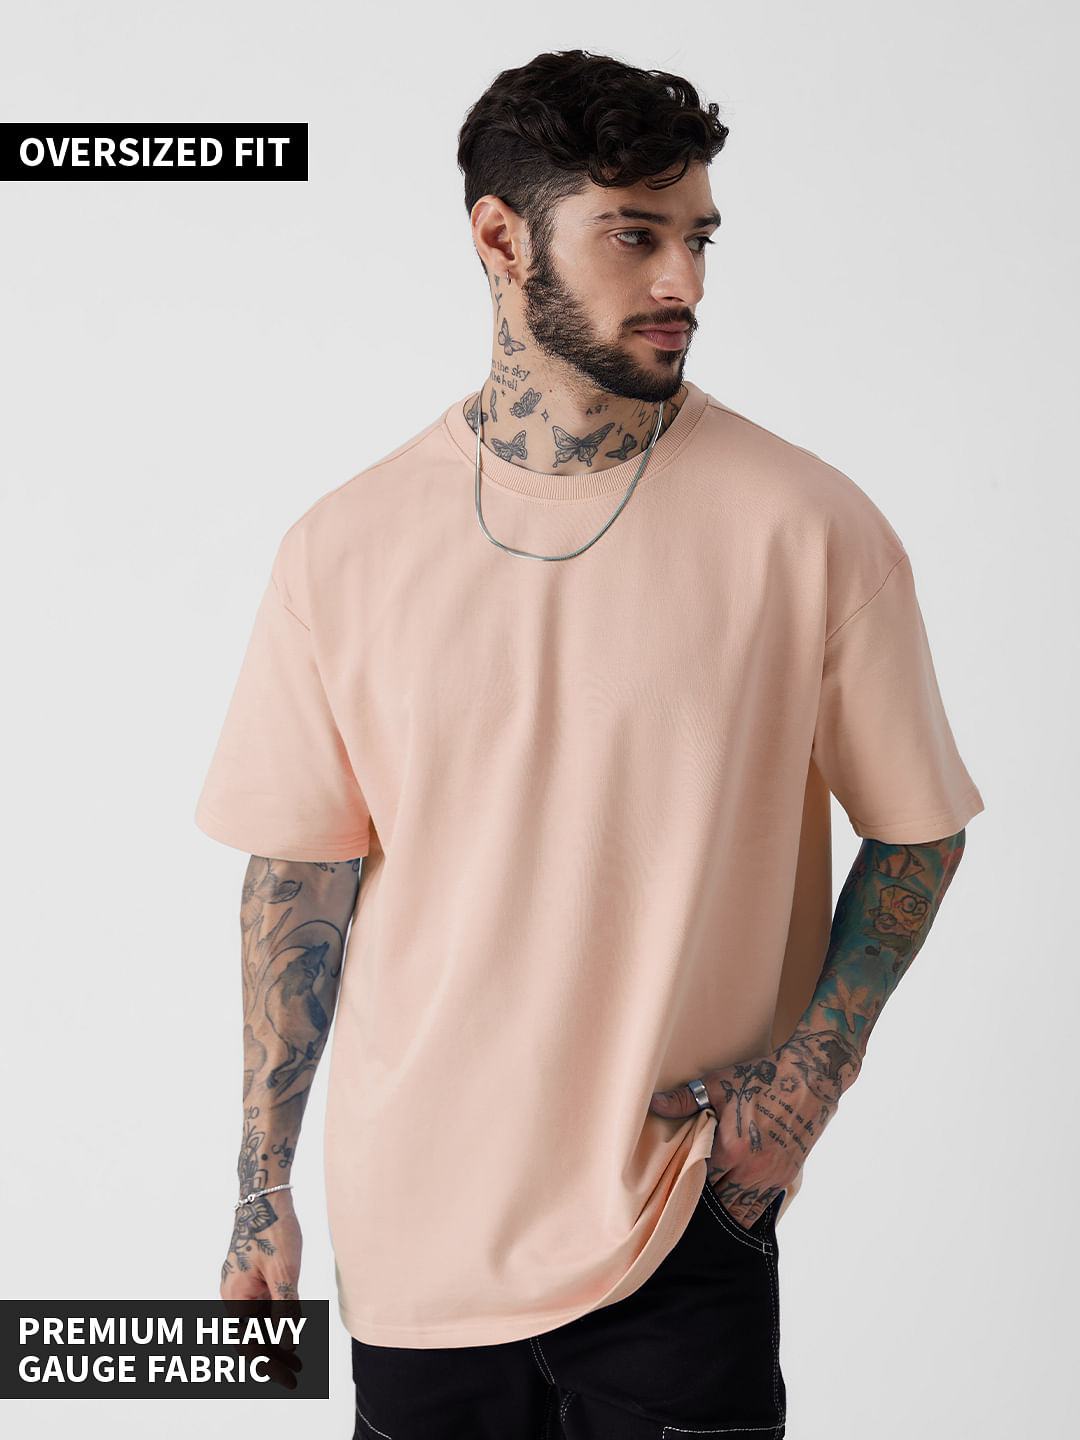 The Souled StoreNude Pink Color Round Neck T-Shirt Solid Oversized